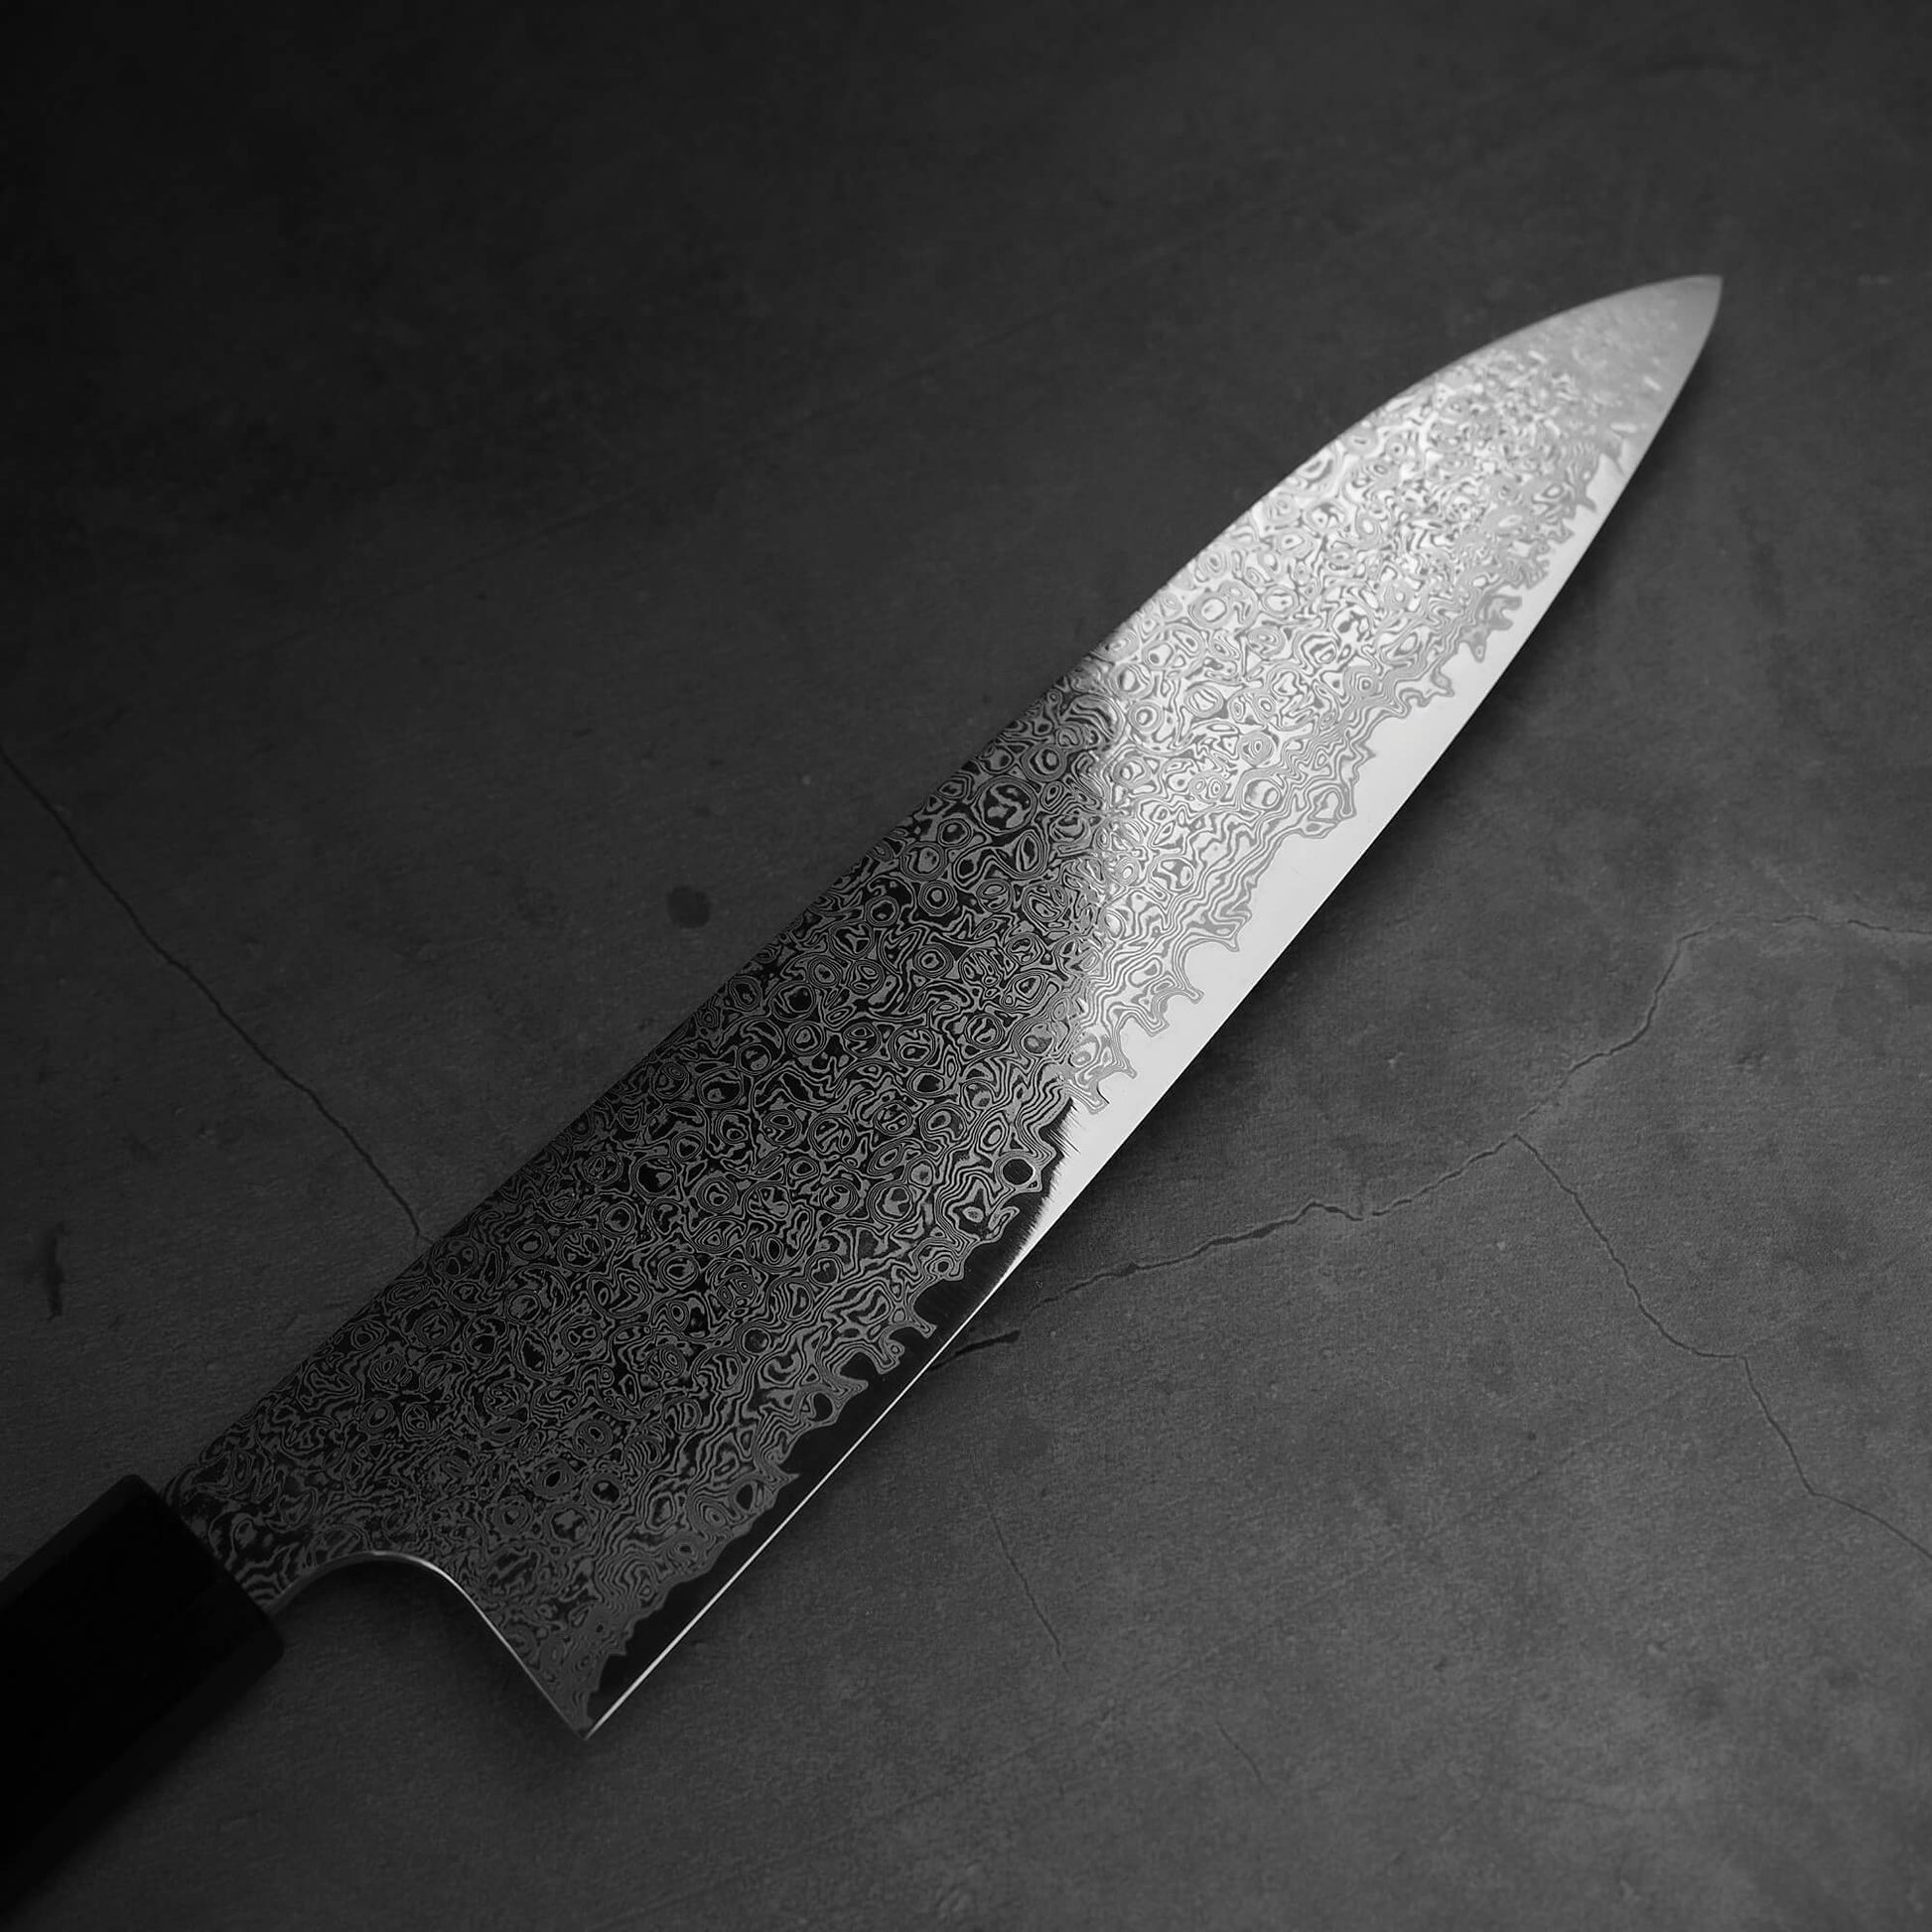 Top view of the blade of Hatsukokoro ginsan damascus gyuto 210mm. Image focuses on the right blade side